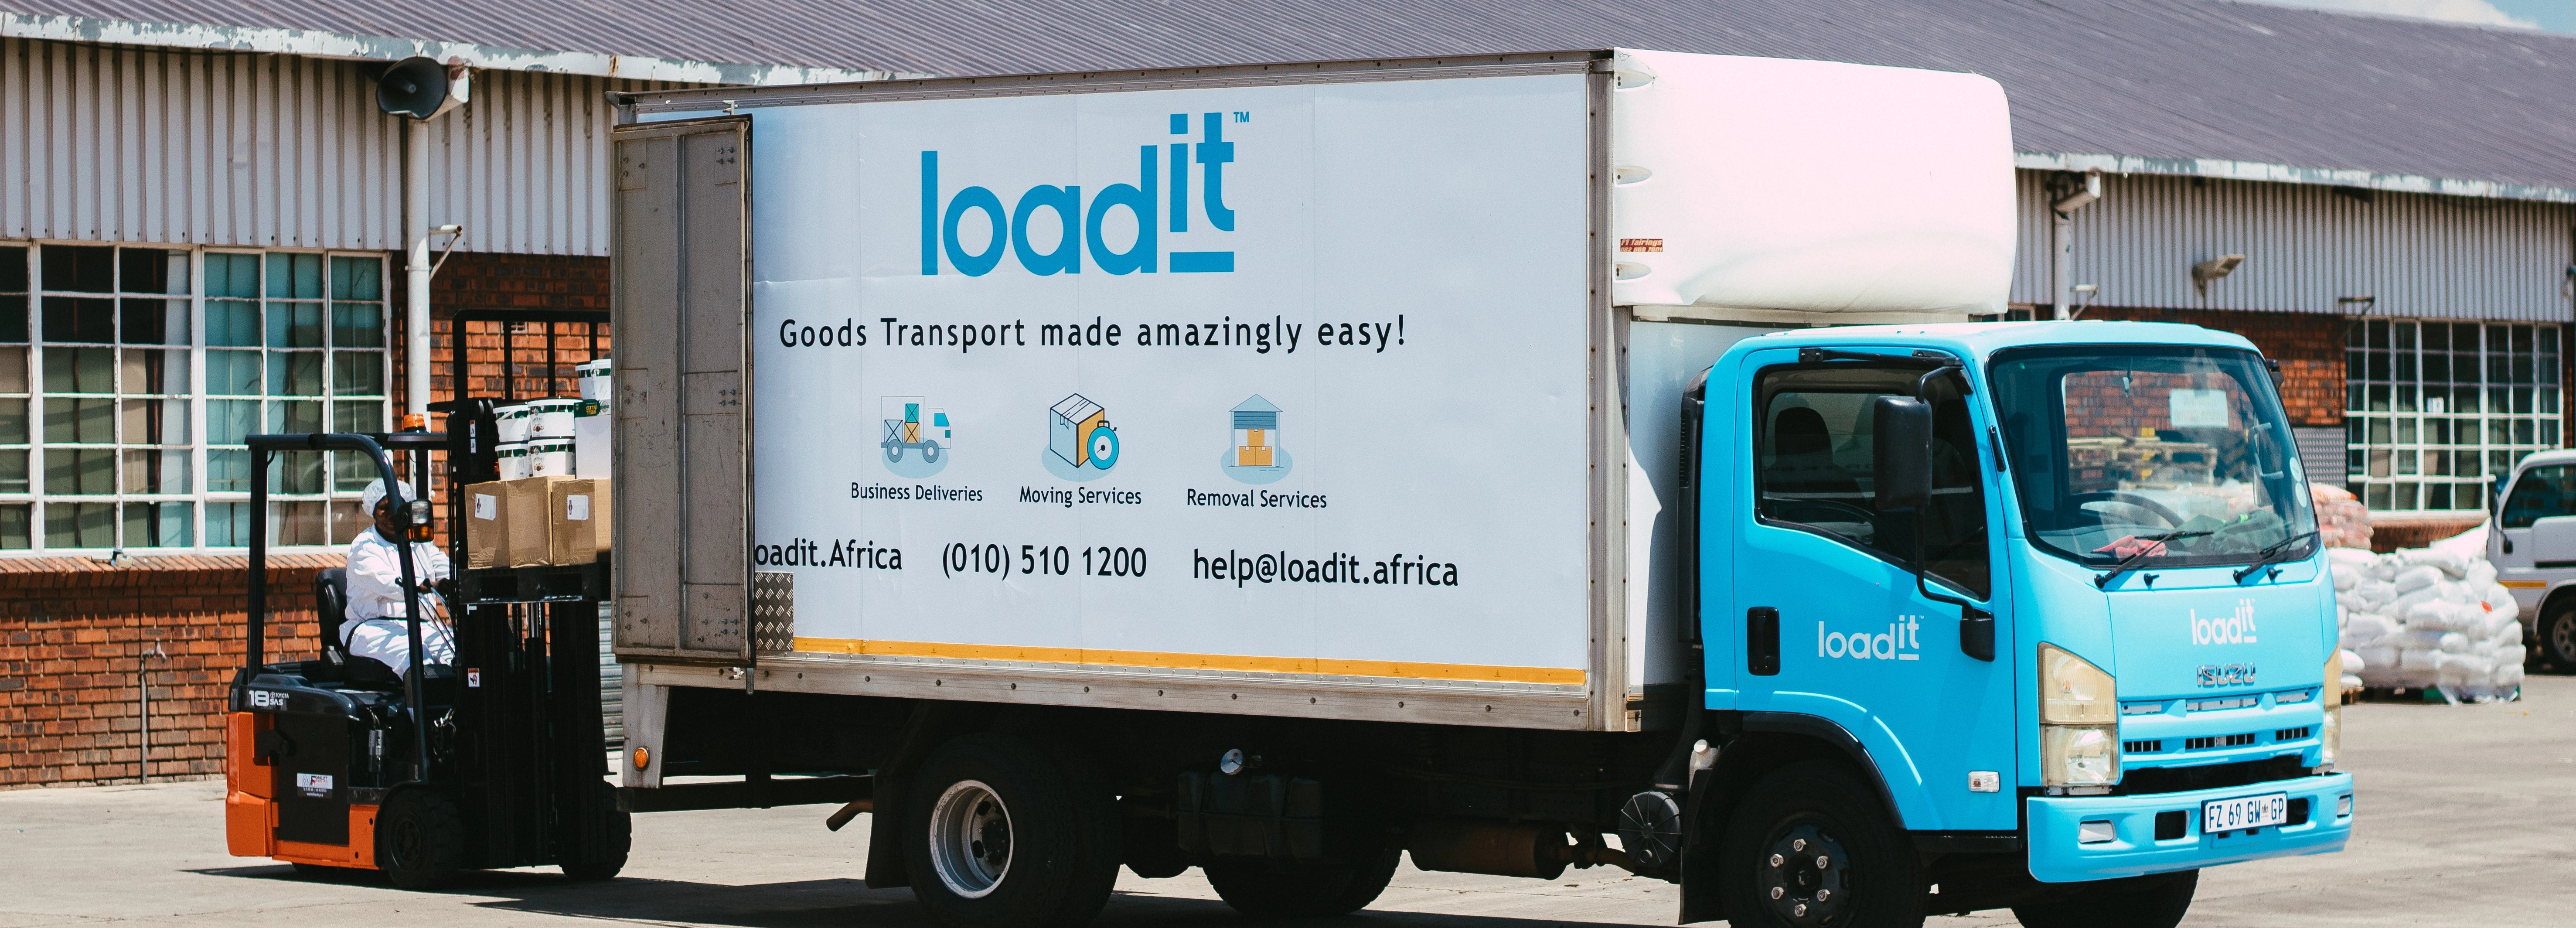 A Loadit truck being loaded with goods